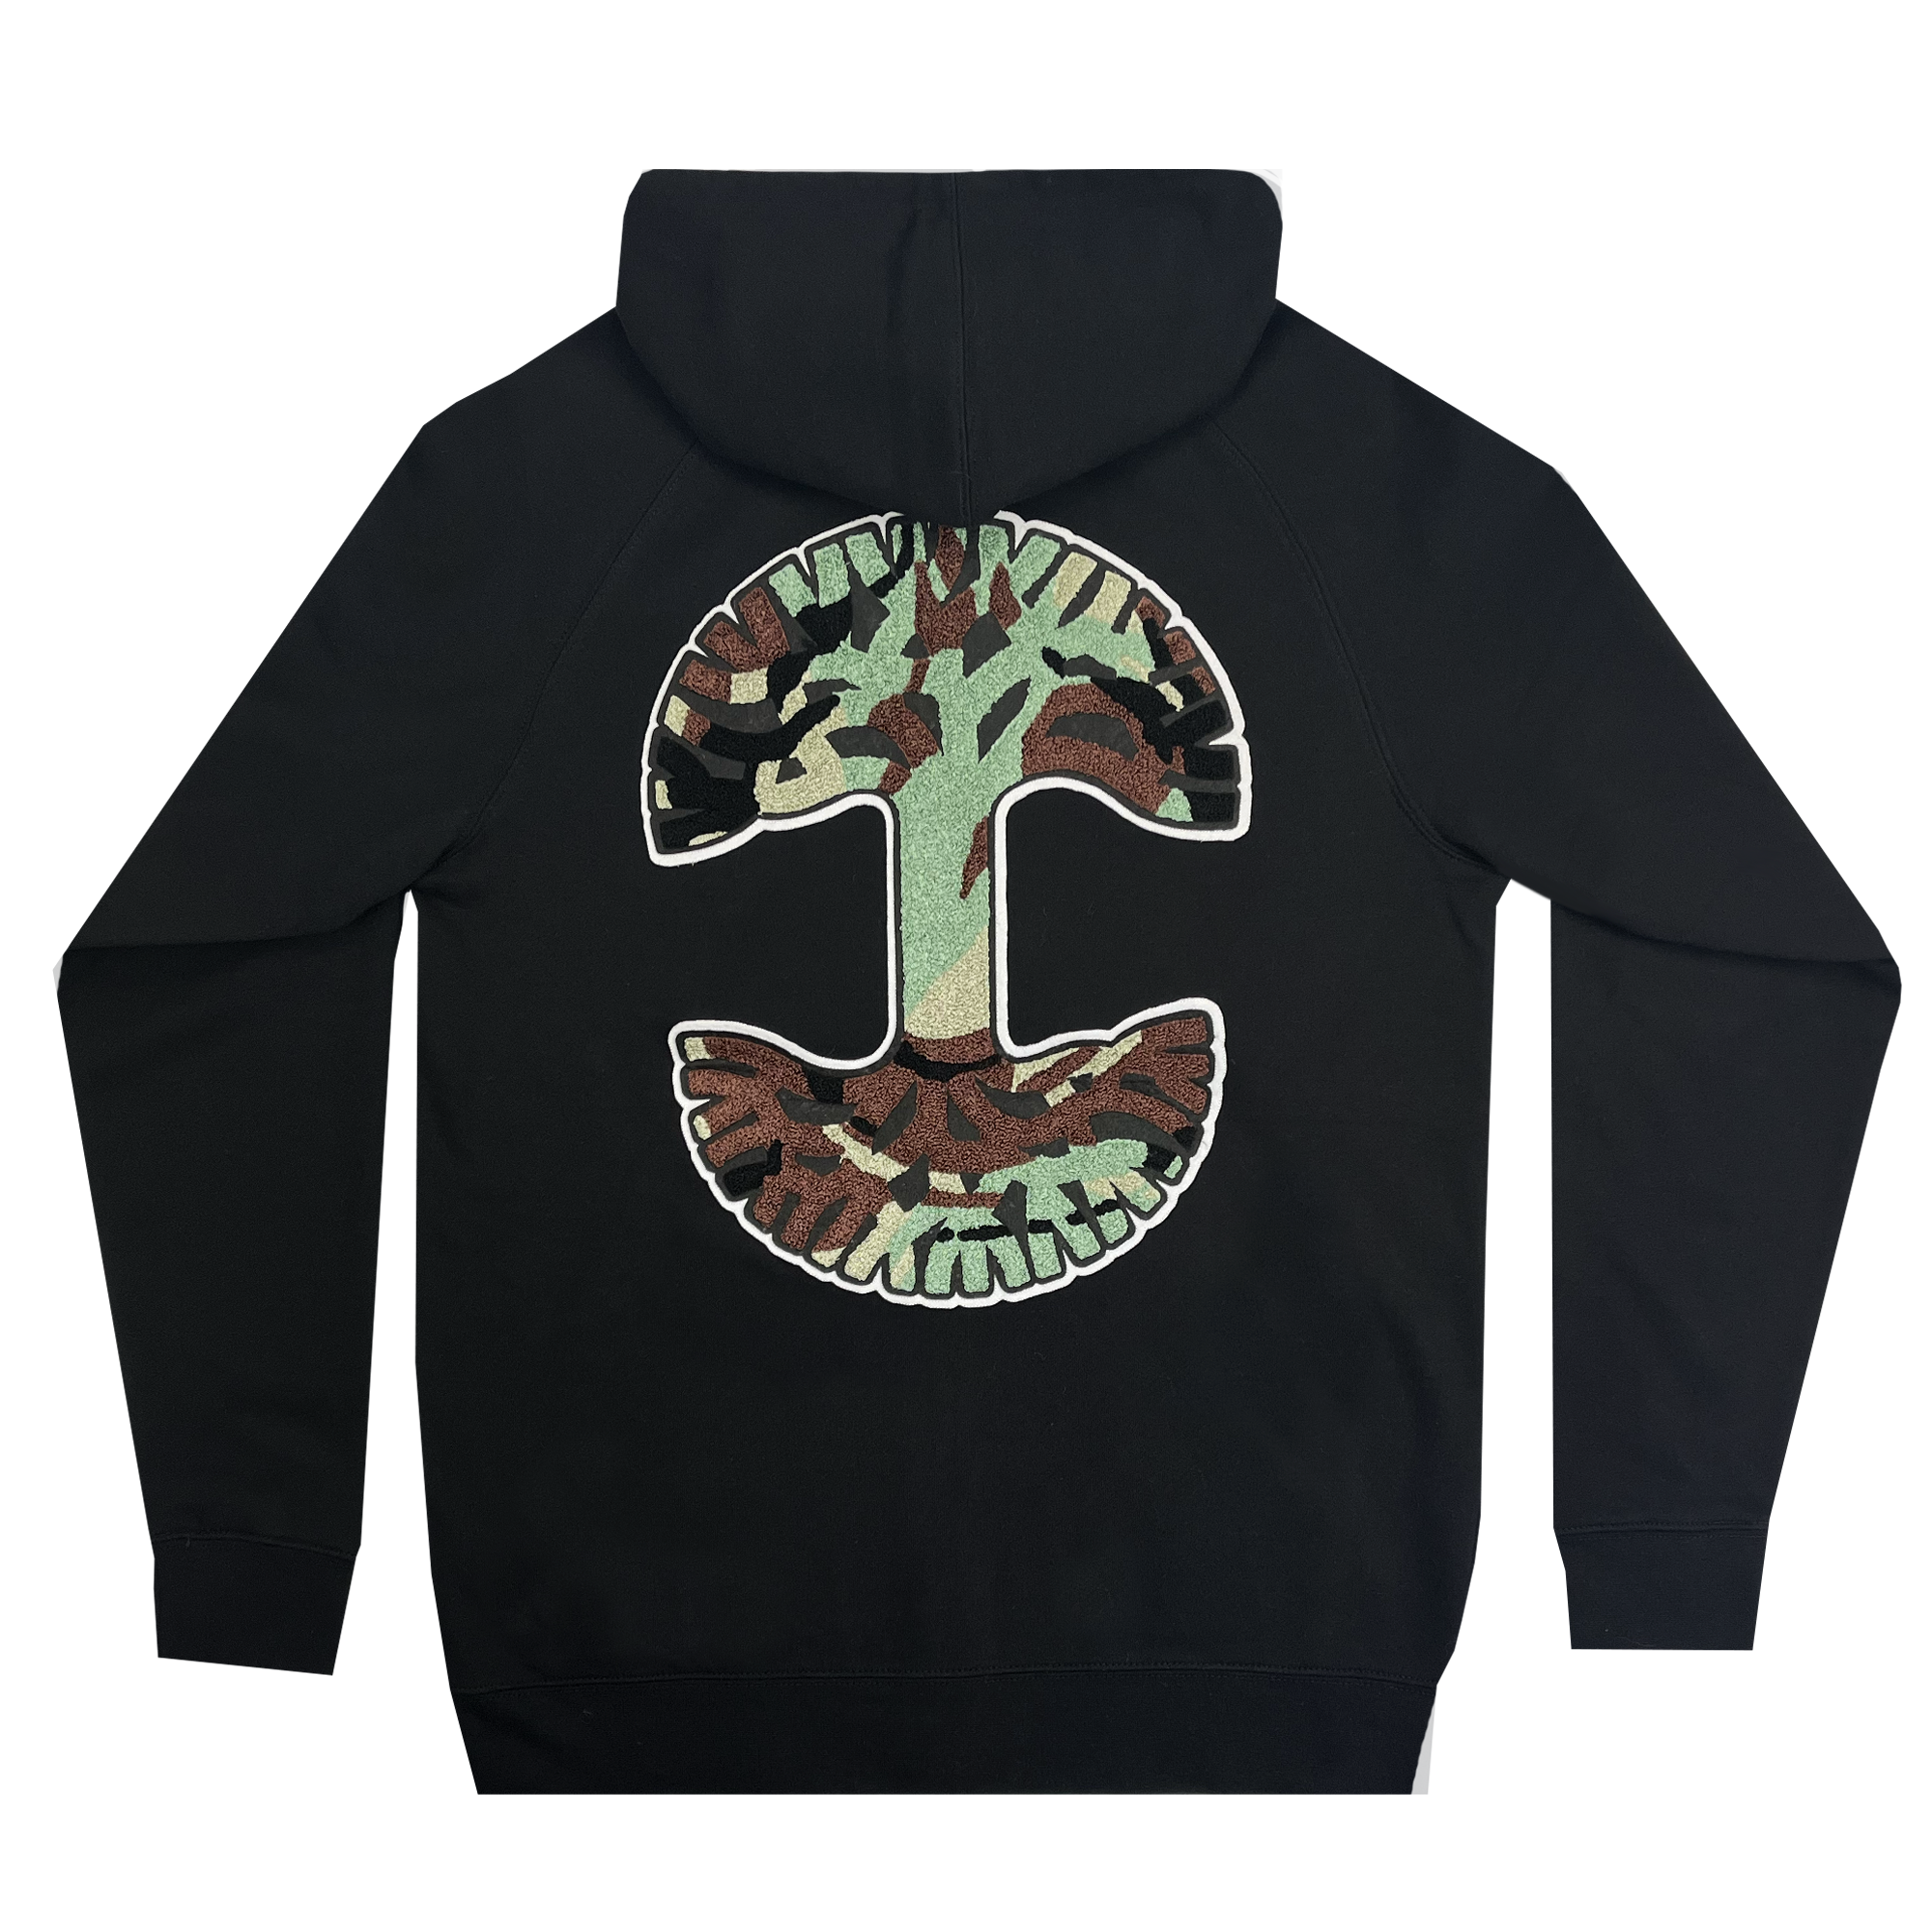 Black zip hoodie with camo Oaklandish tree logo chenile patch on back.